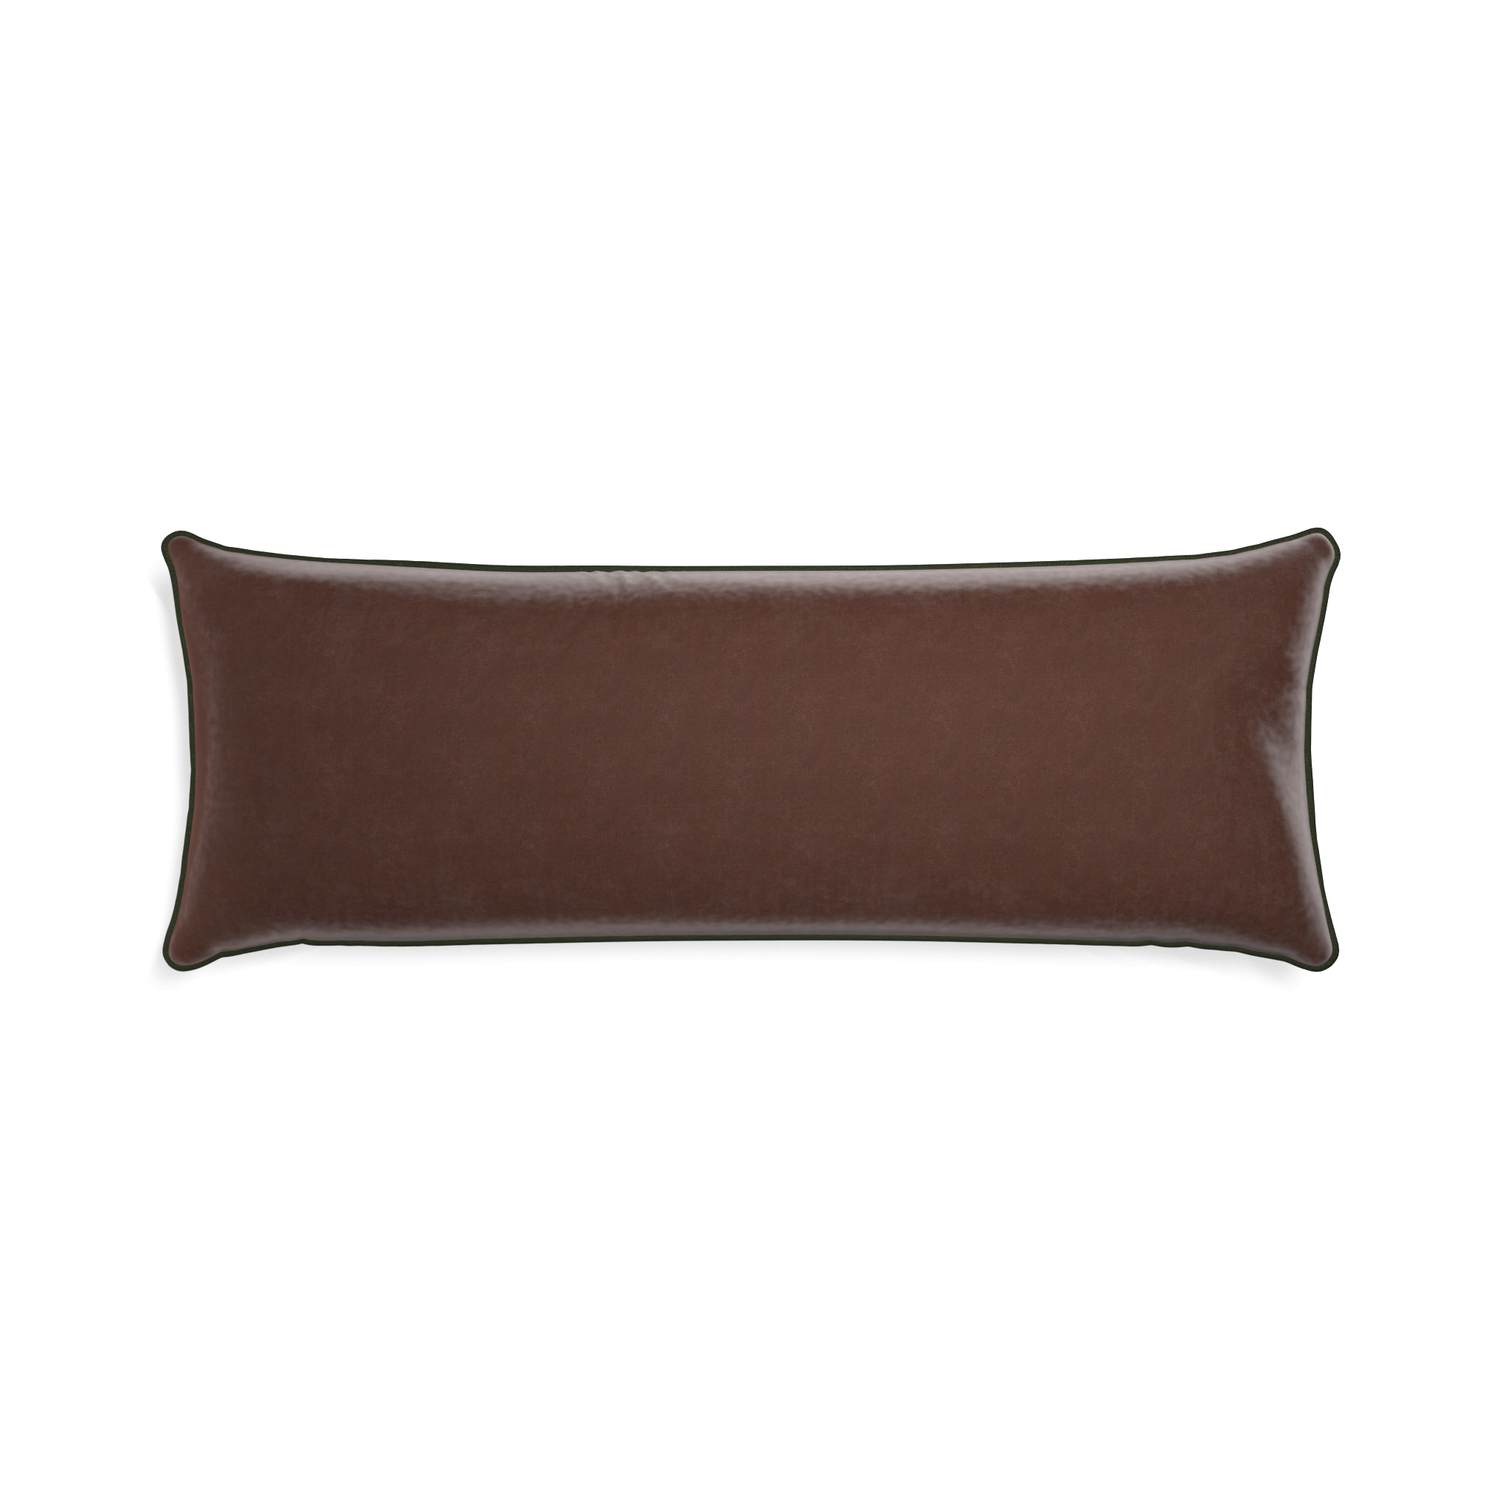 rectangle brown velvet pillow with fern green piping